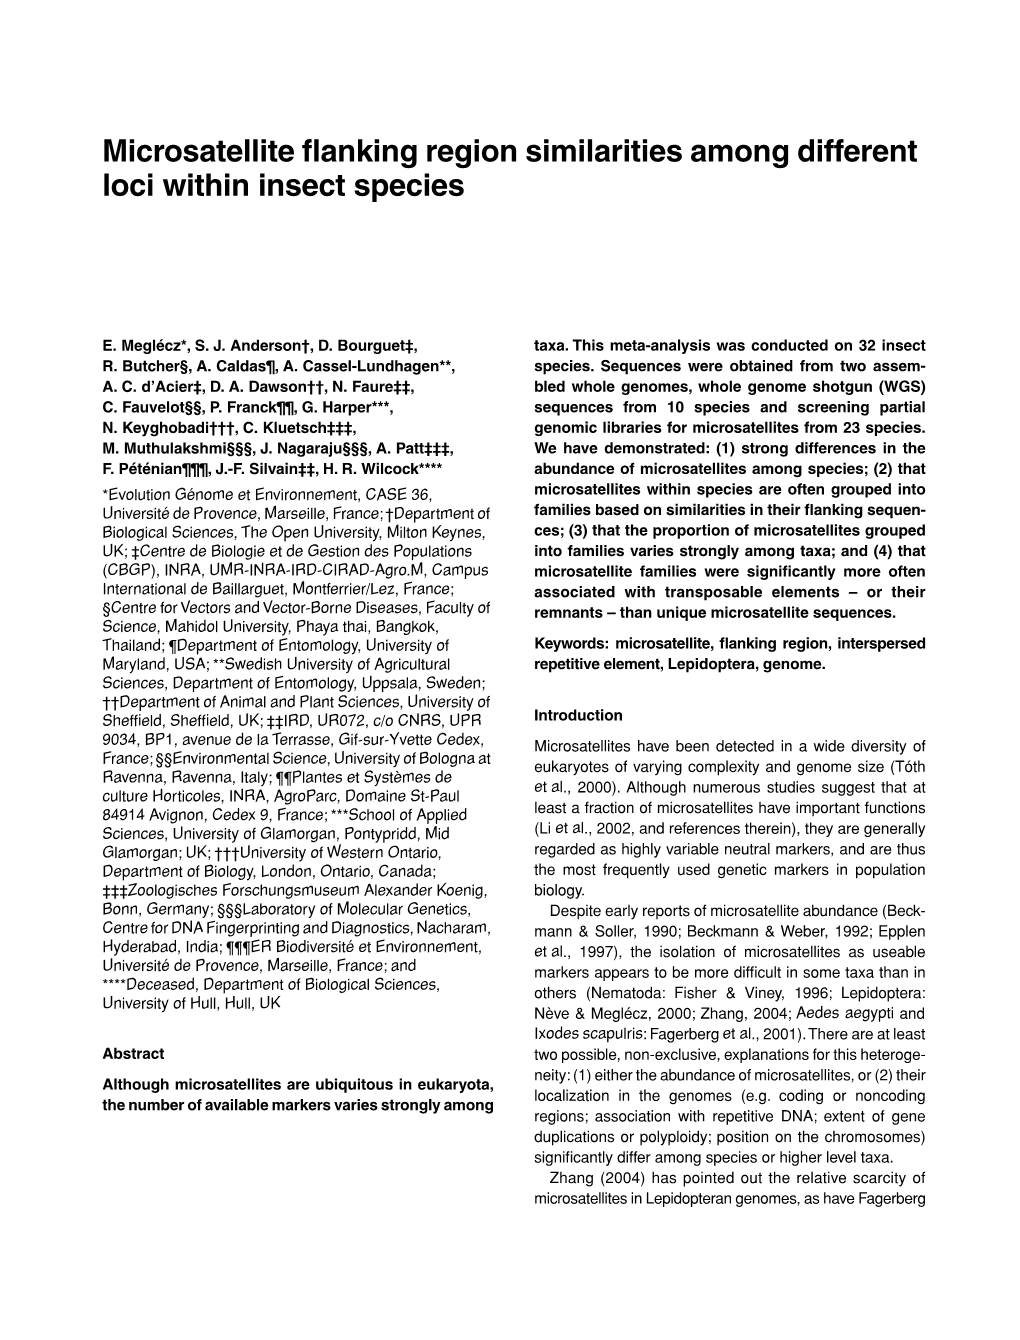 Microsatellite Flanking Region Similarities Among Different Loci Within Insect Species